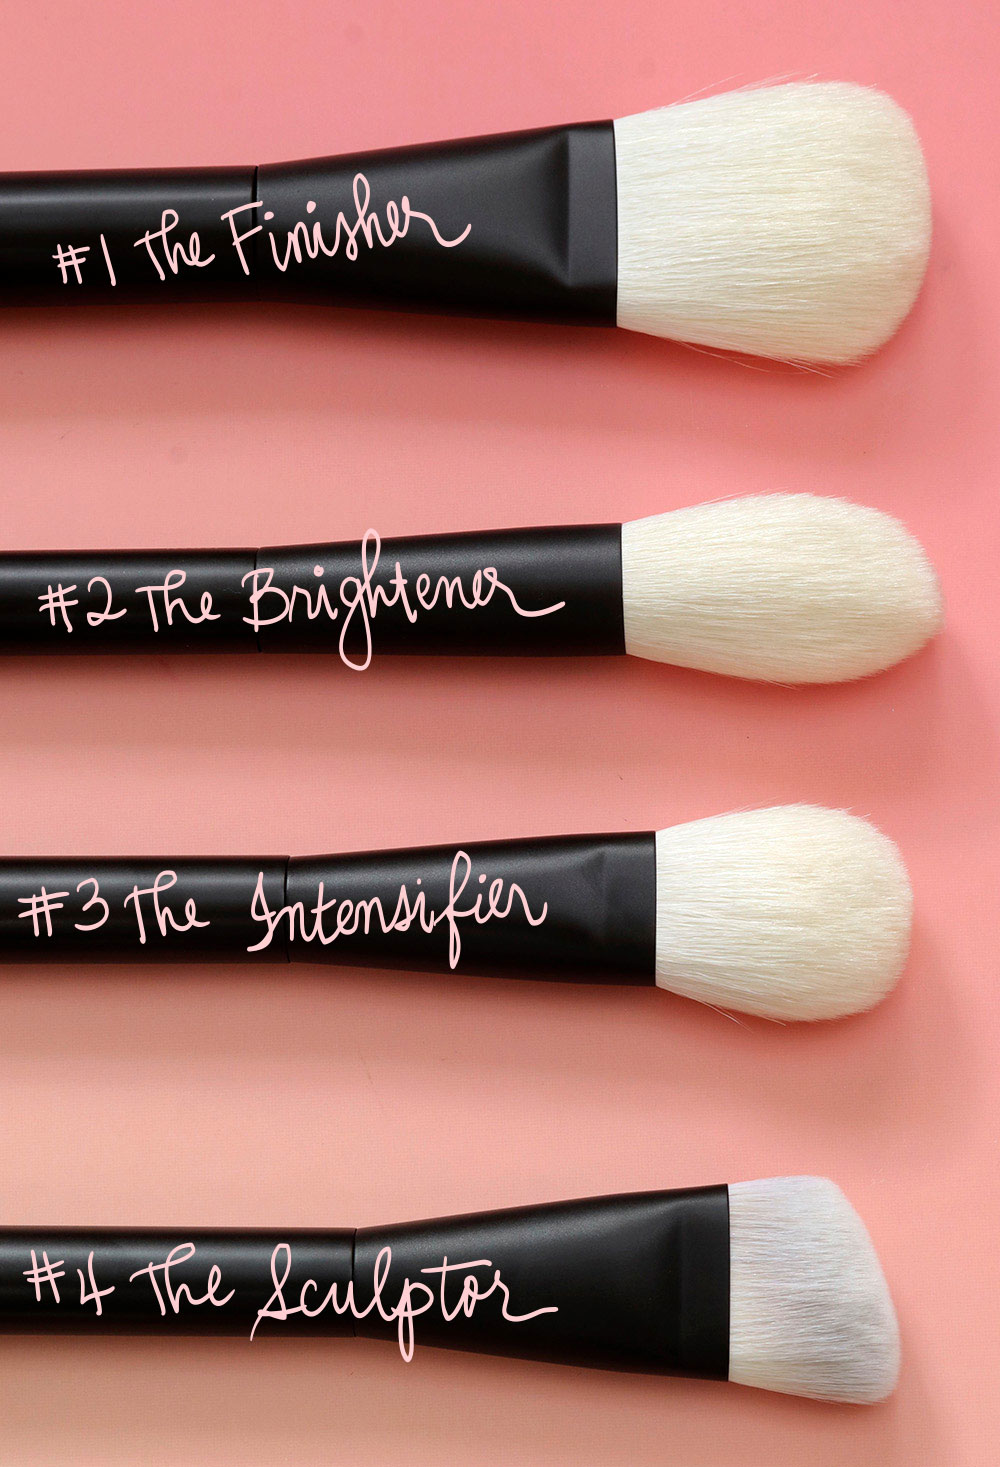 nars pro brush collection 1 4